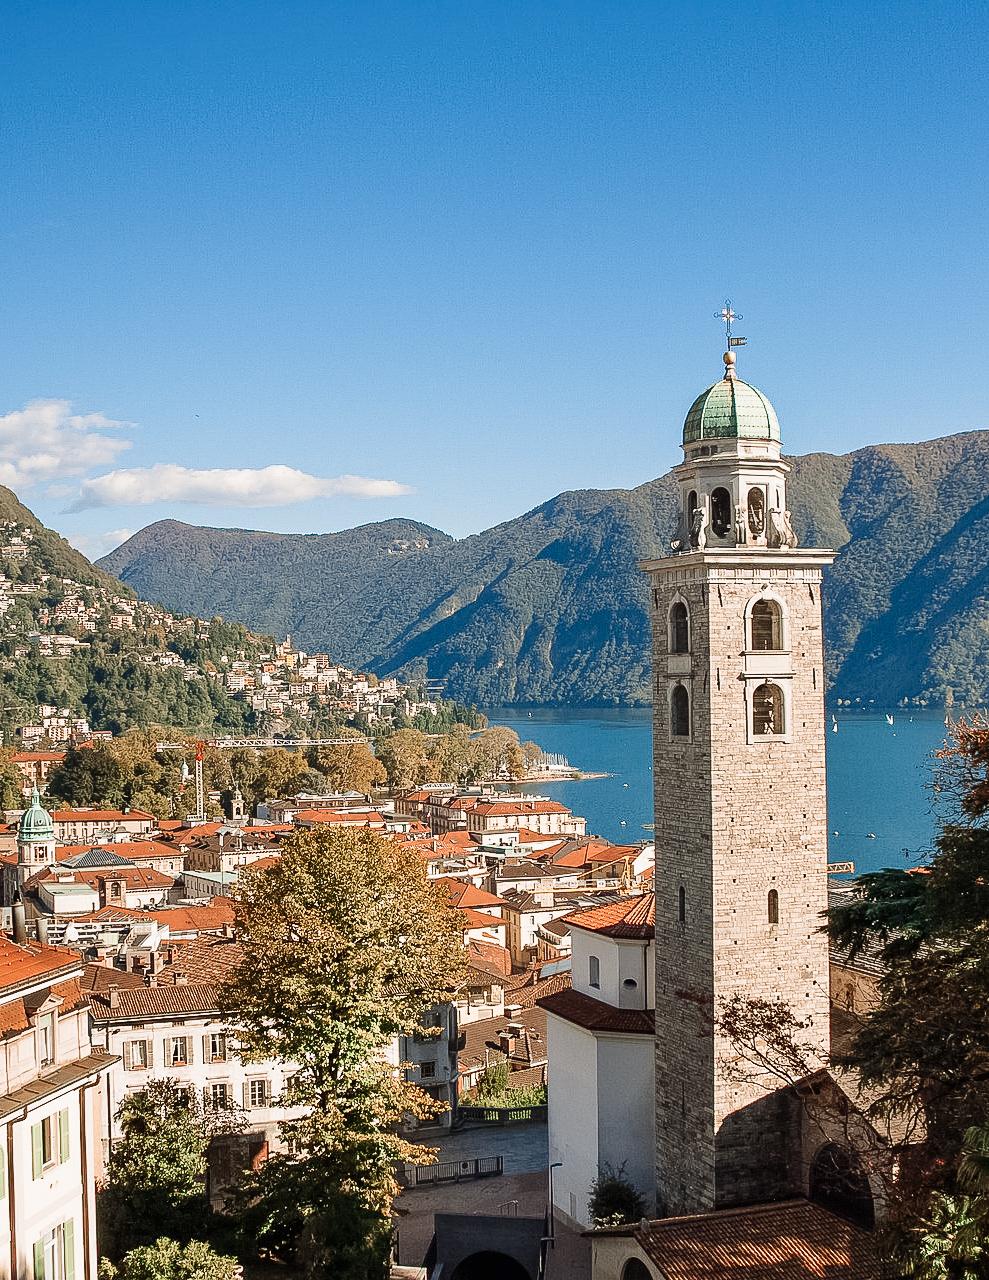 view of Lugano from above with the church tower and lake in view